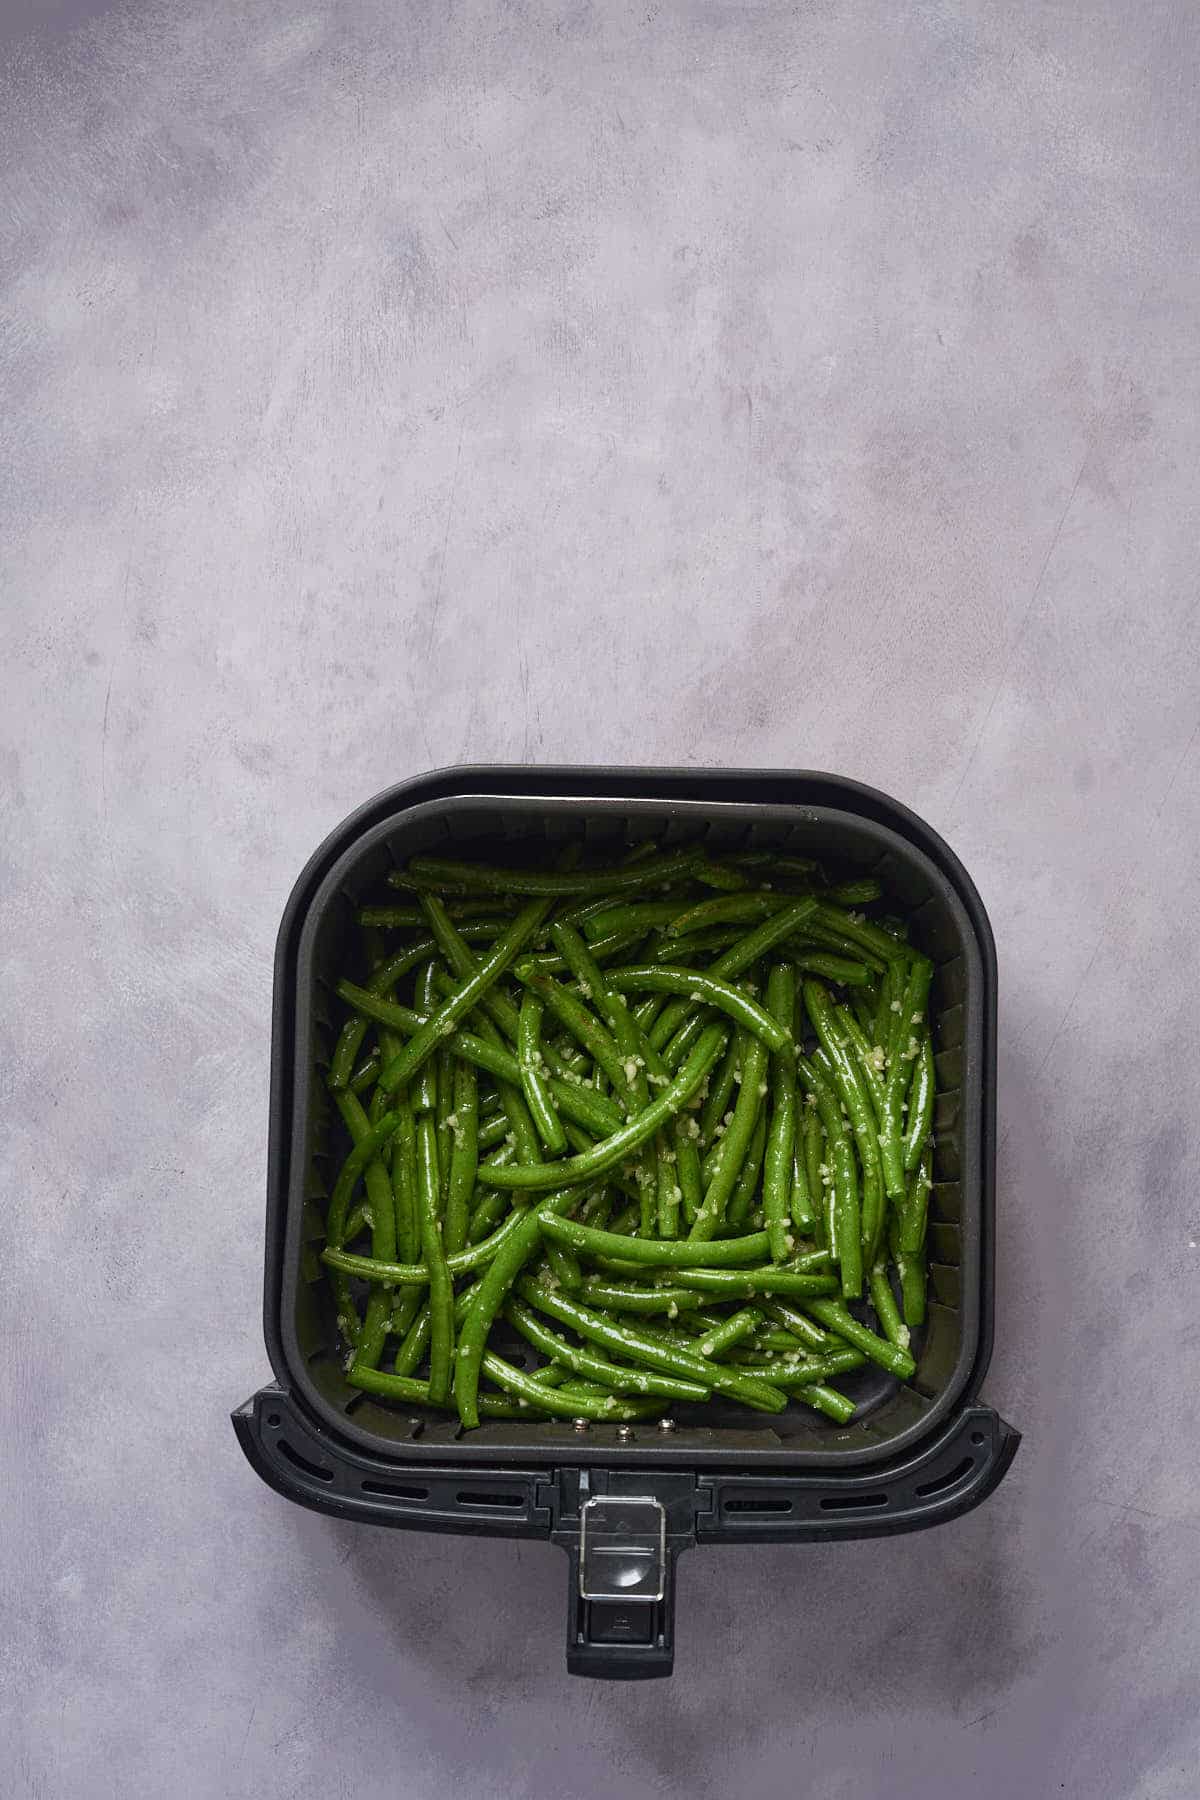 Uncooked garlic green beans in the air fryer basket.